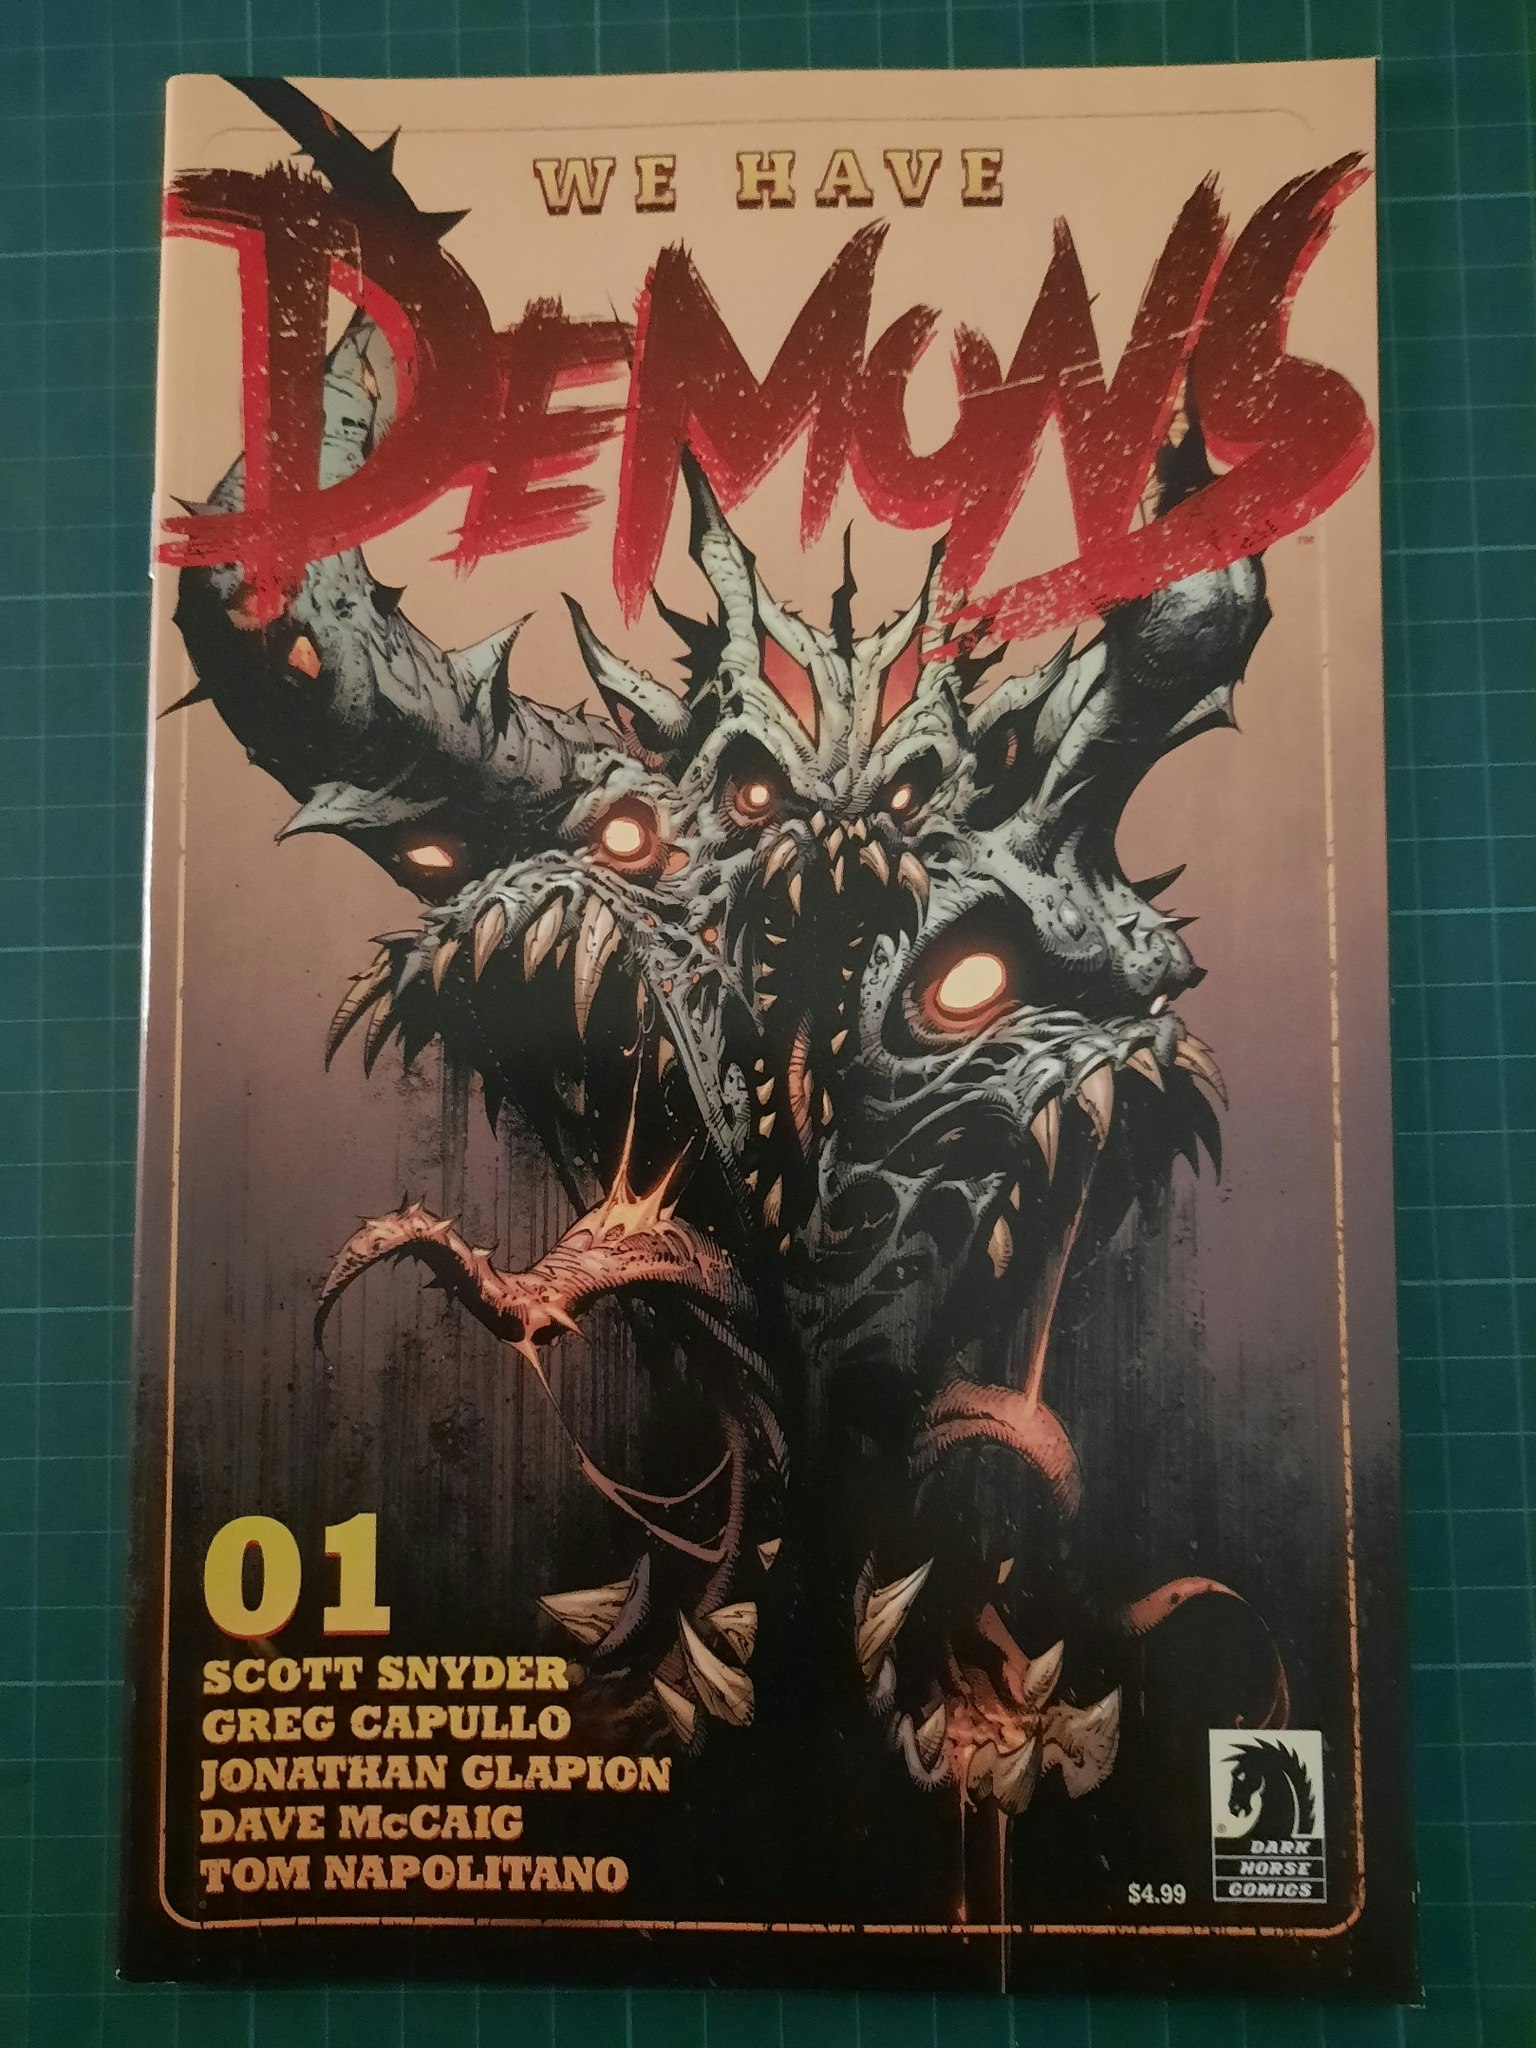 We have demons #01